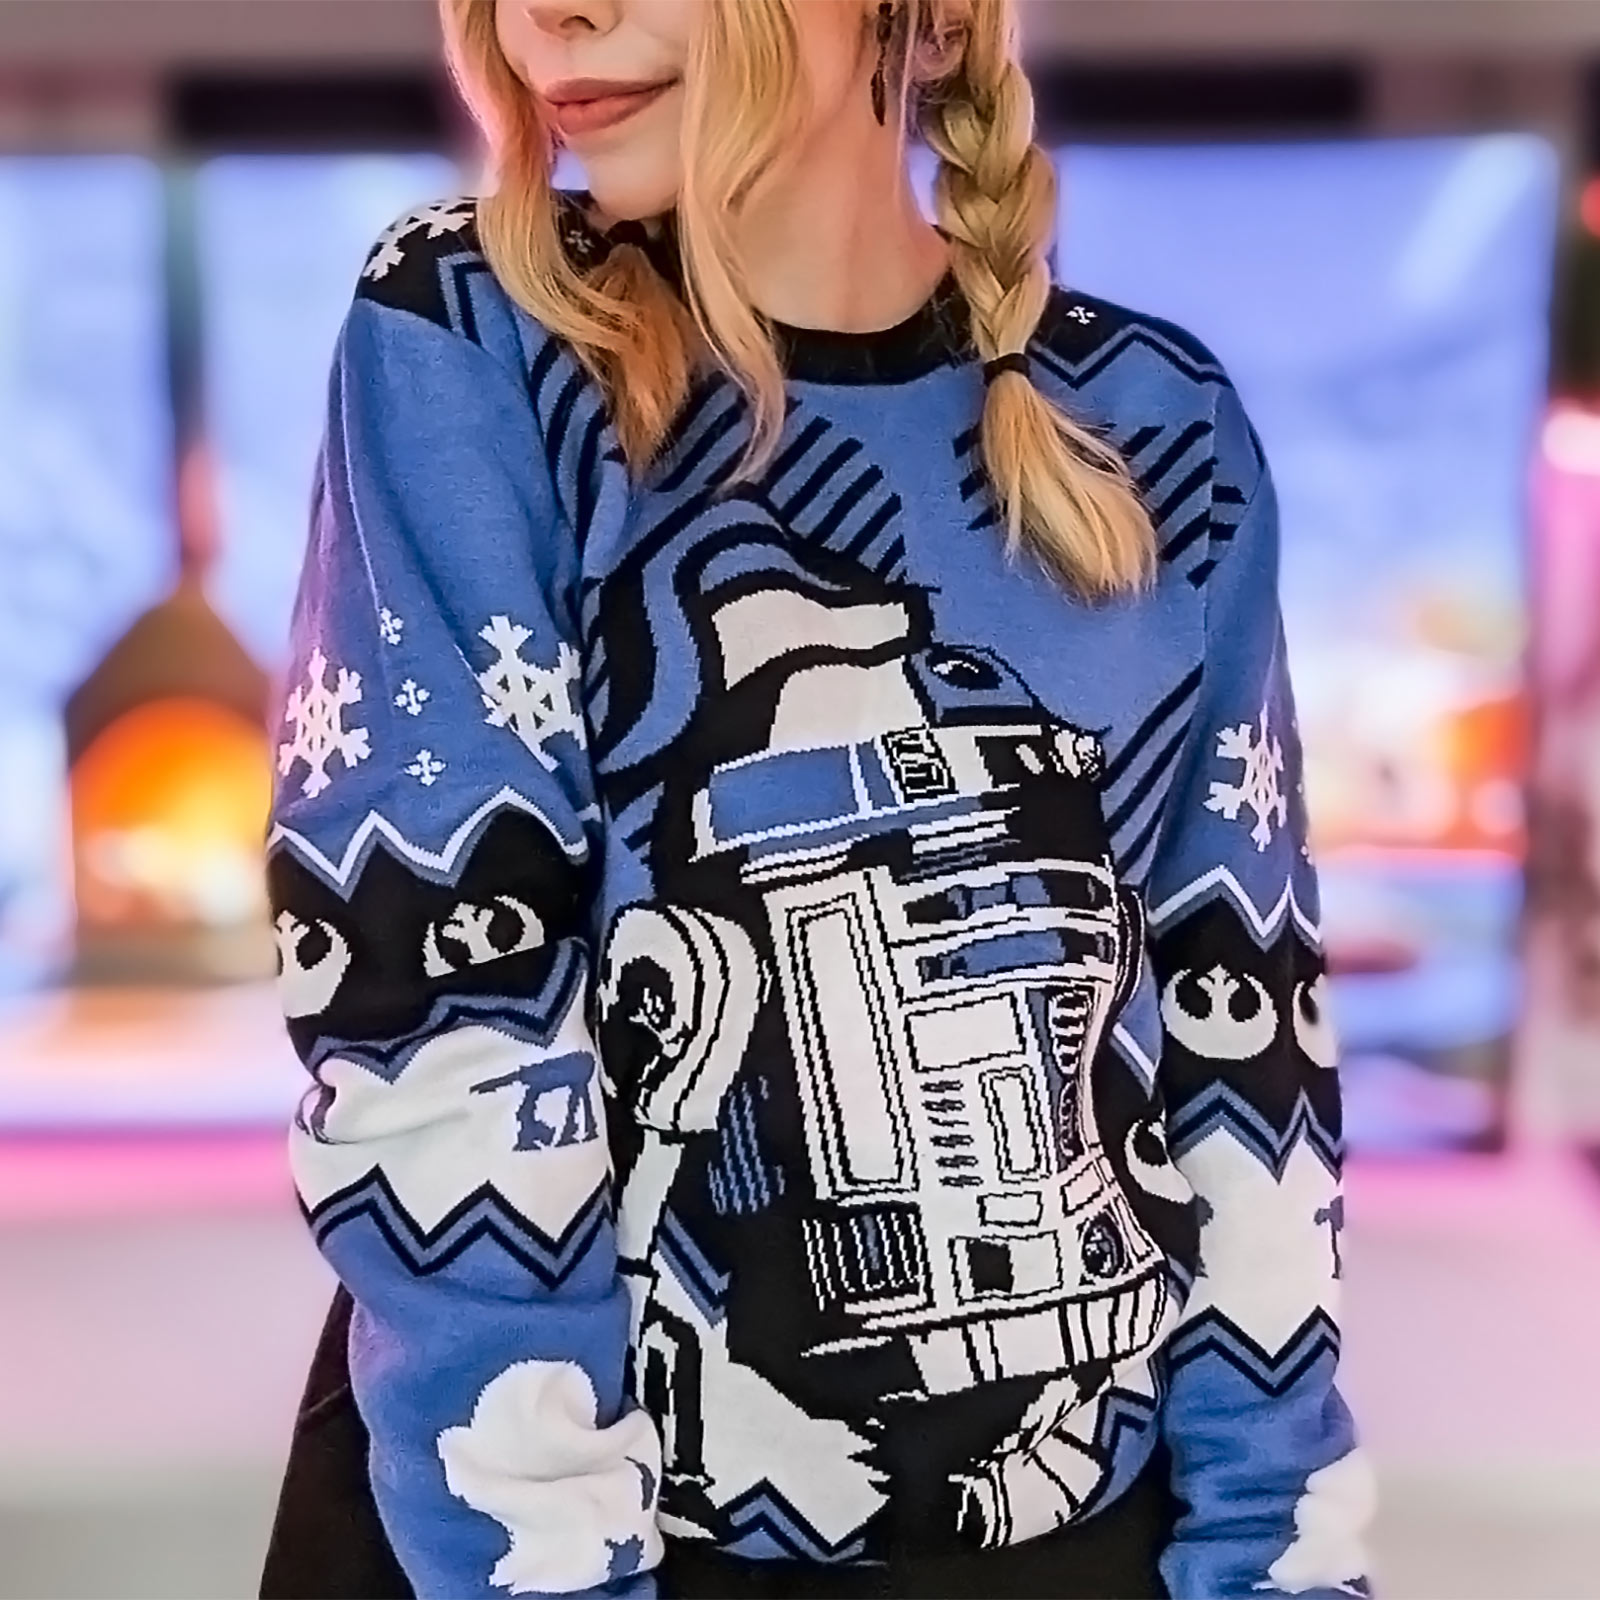 Star Wars - R2-D2 Knitted Sweater